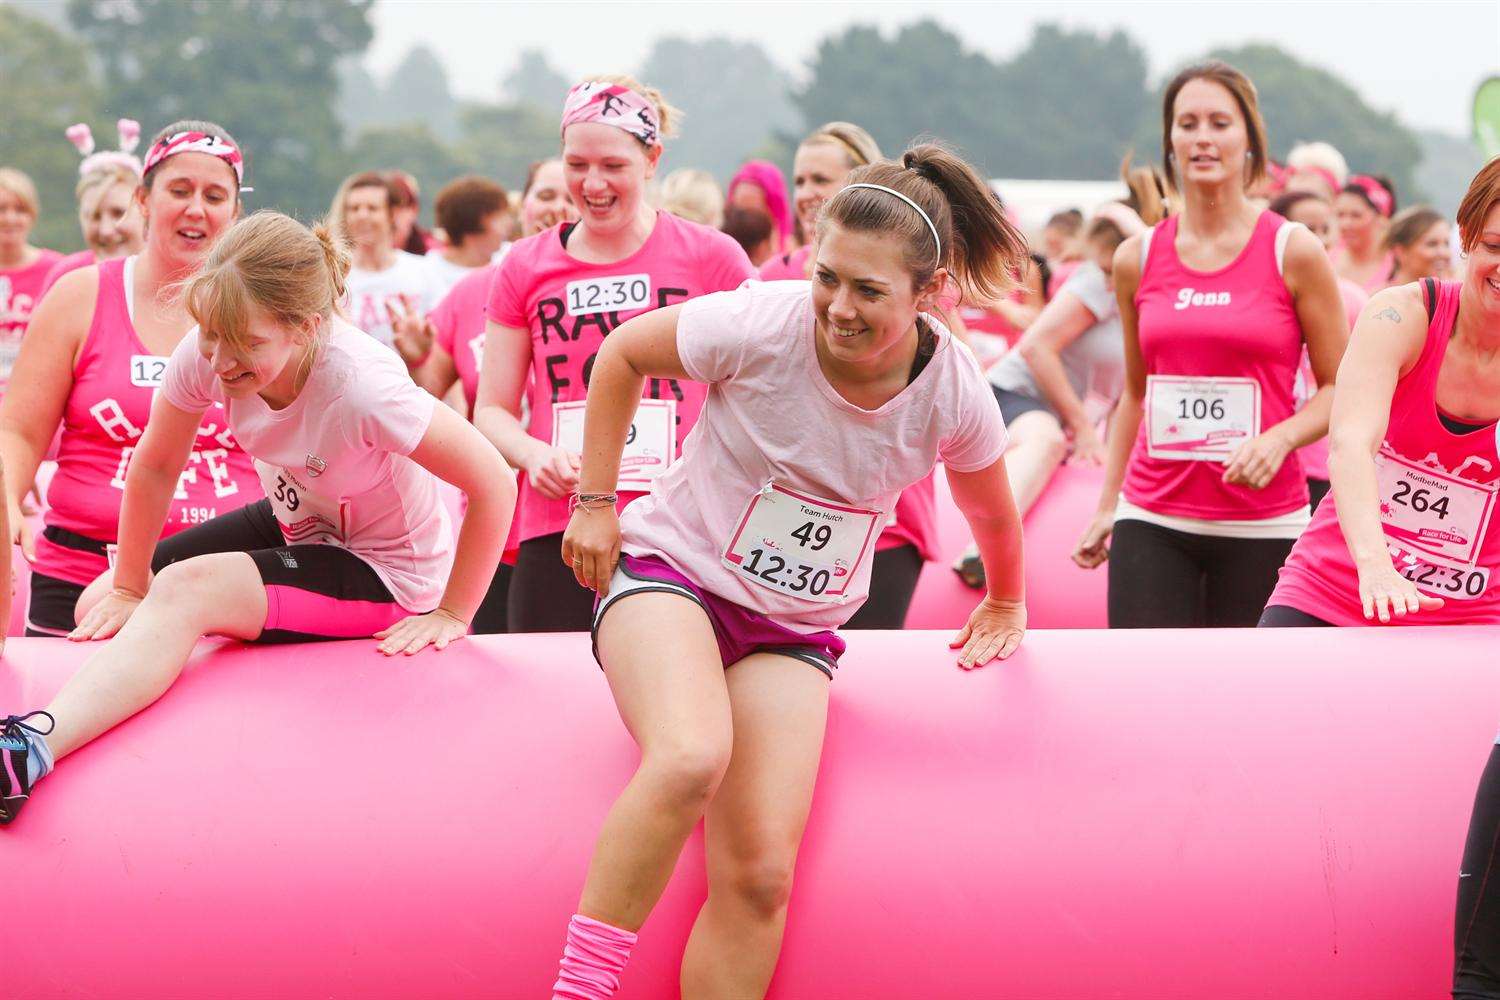 Runners reach the first obstacle at the Pretty Muddy event held in Mote Park, Maidstone.